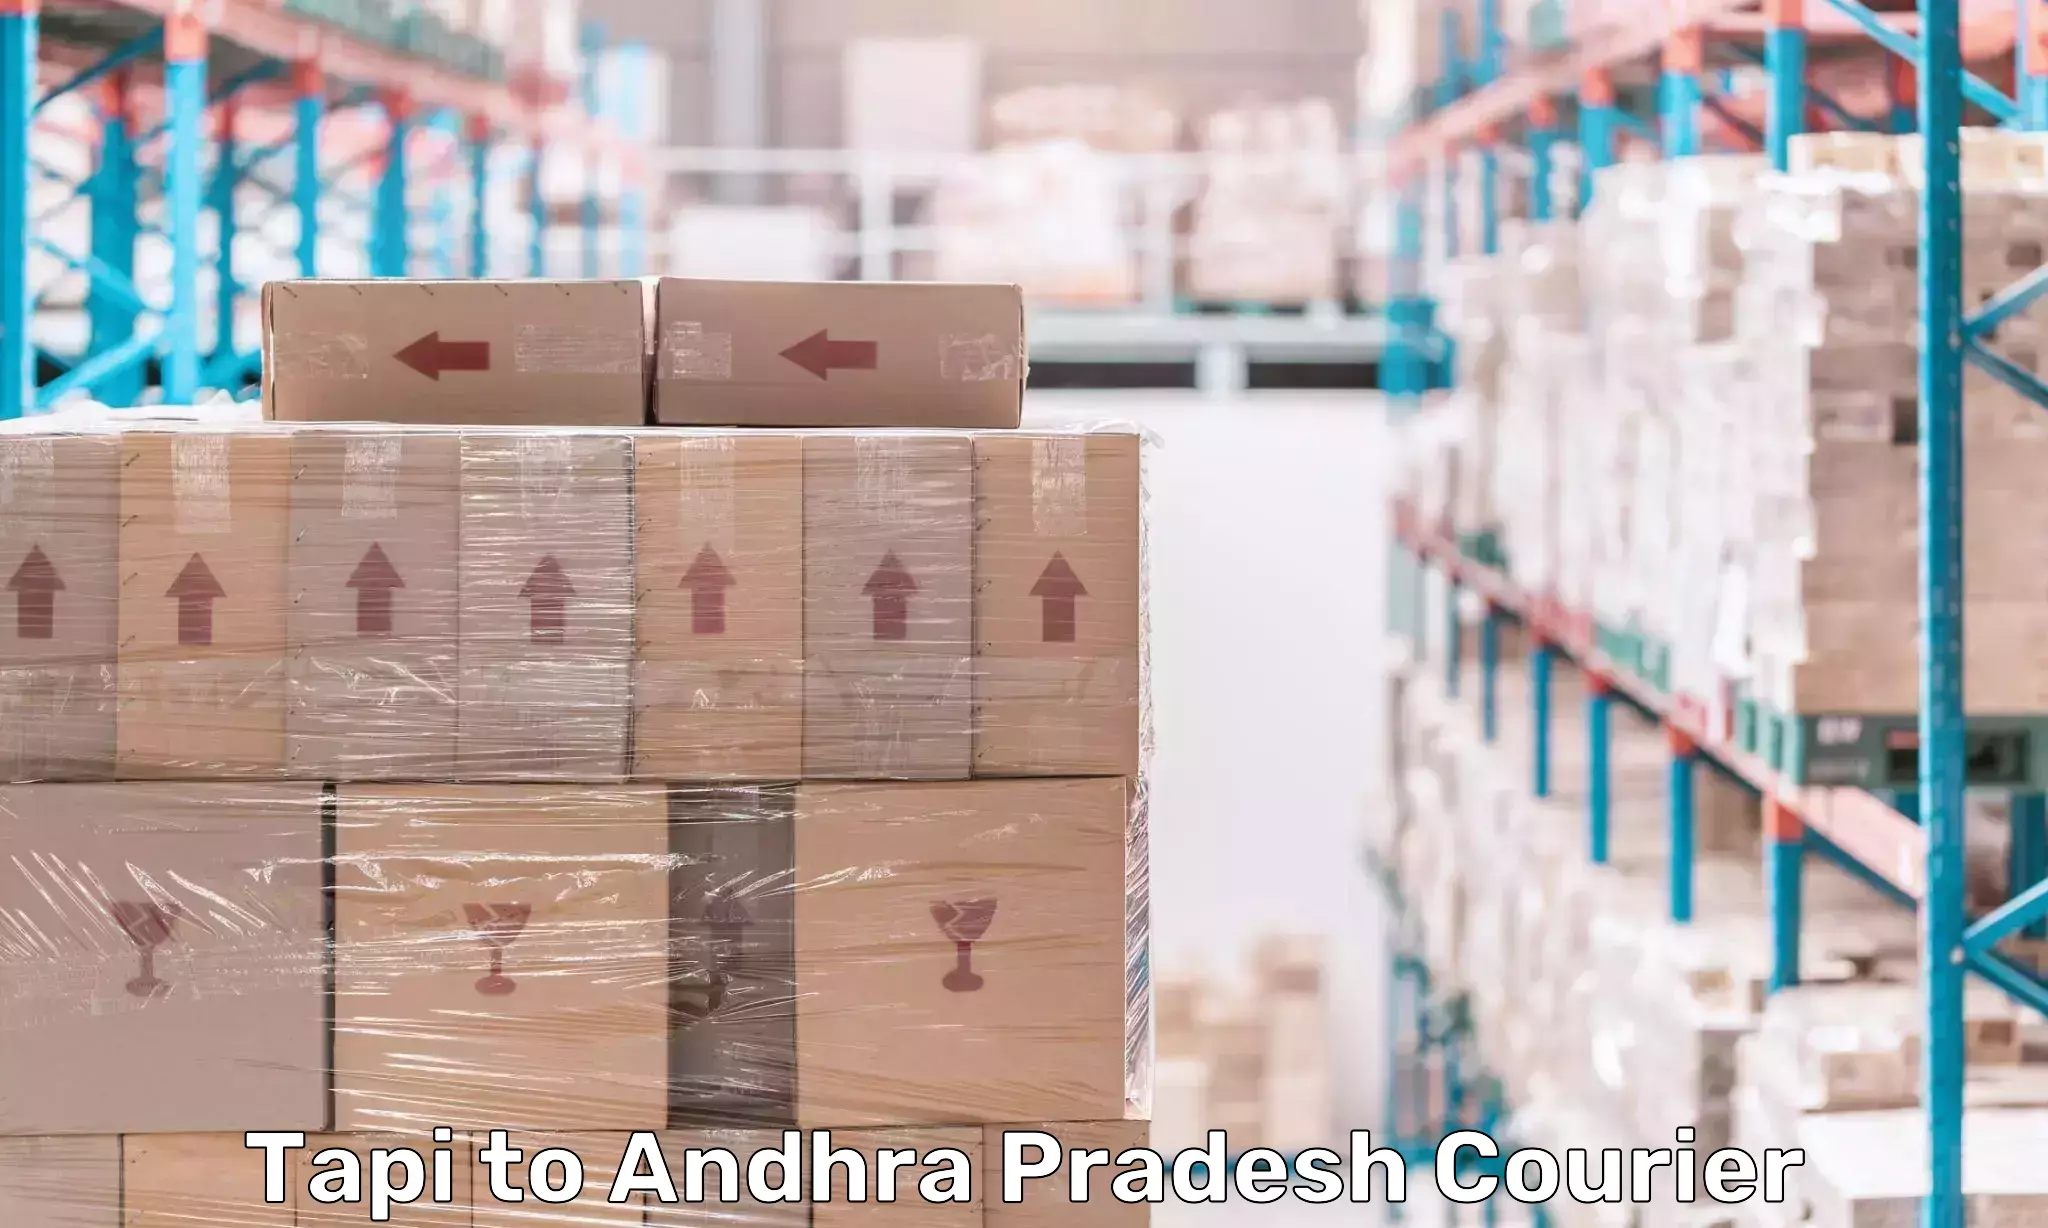 Pharmaceutical courier in Tapi to Andhra Pradesh